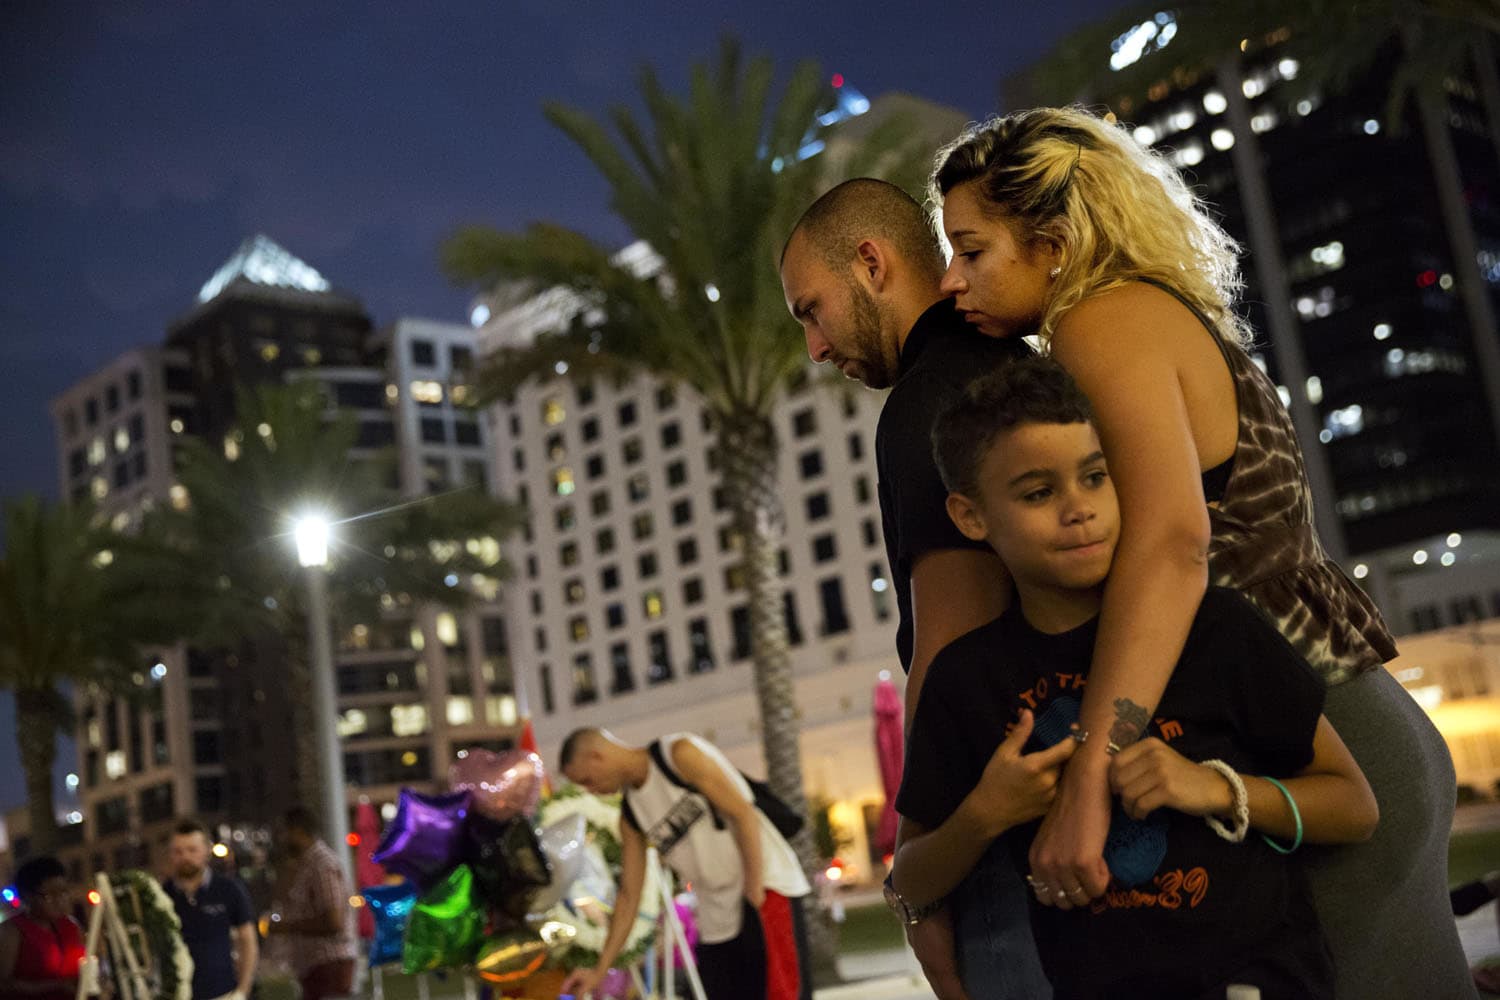 Jennifer Johnson, right, leans on her boyfriend Jeansem Sambolin while standing with her son Tyrone Clarke, 8, as they visit a makeshift memorial for the victims of the mass shooting at the Pulse Orlando nightclub Tuesday, June 14, 2016, in Orlando, Fla. David Goldman / AP)